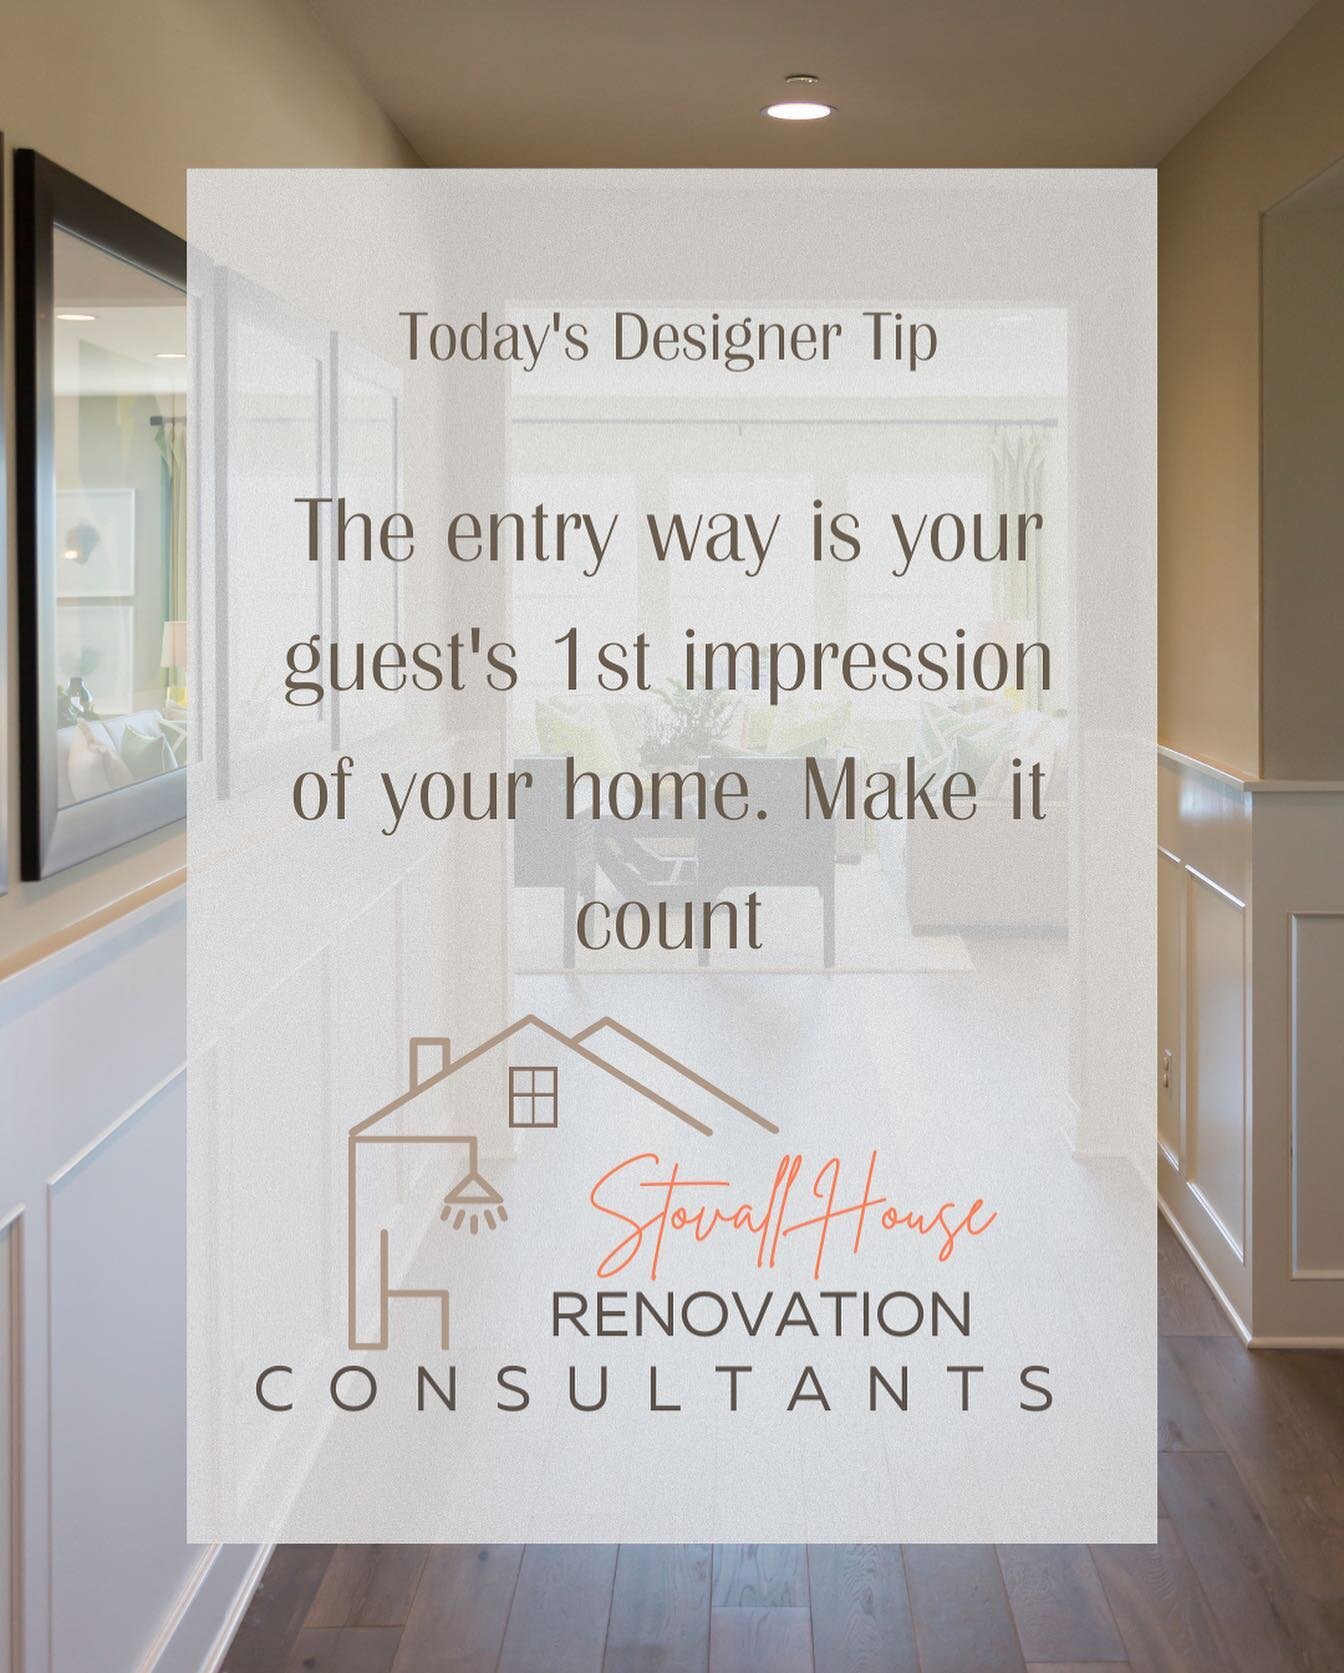 To decorate your entryway, you can add a welcome mat, a coat rack or hooks for your guests' coats and bags, a decorative mirror, a vase of fresh flowers or a potted plant, and some framed artwork or photographs. 

You could also consider adding a sma